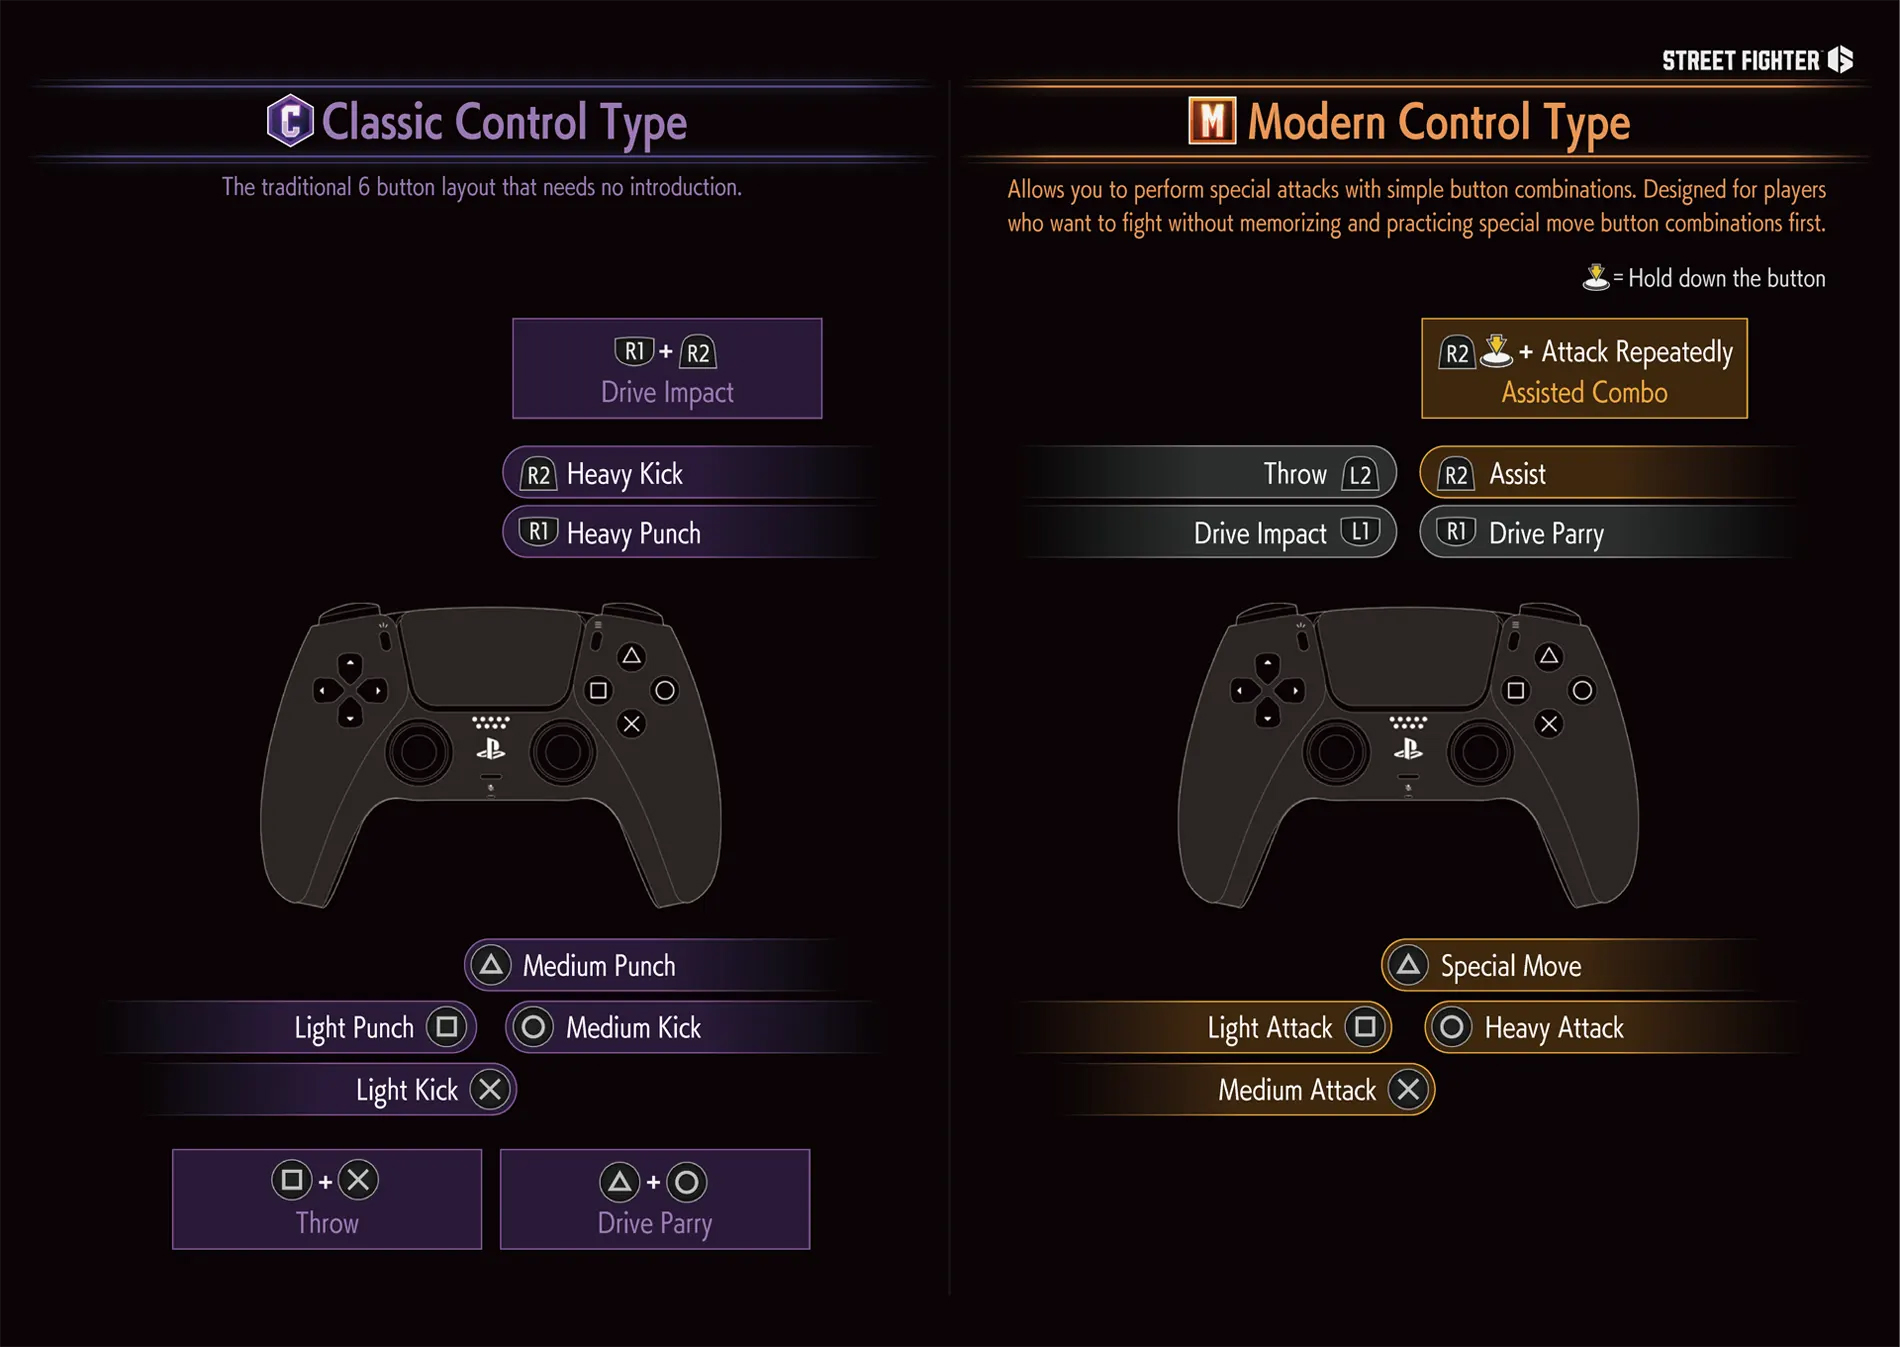 Simplified Inputs - SF6 allows for both classic and "modern" input styles.